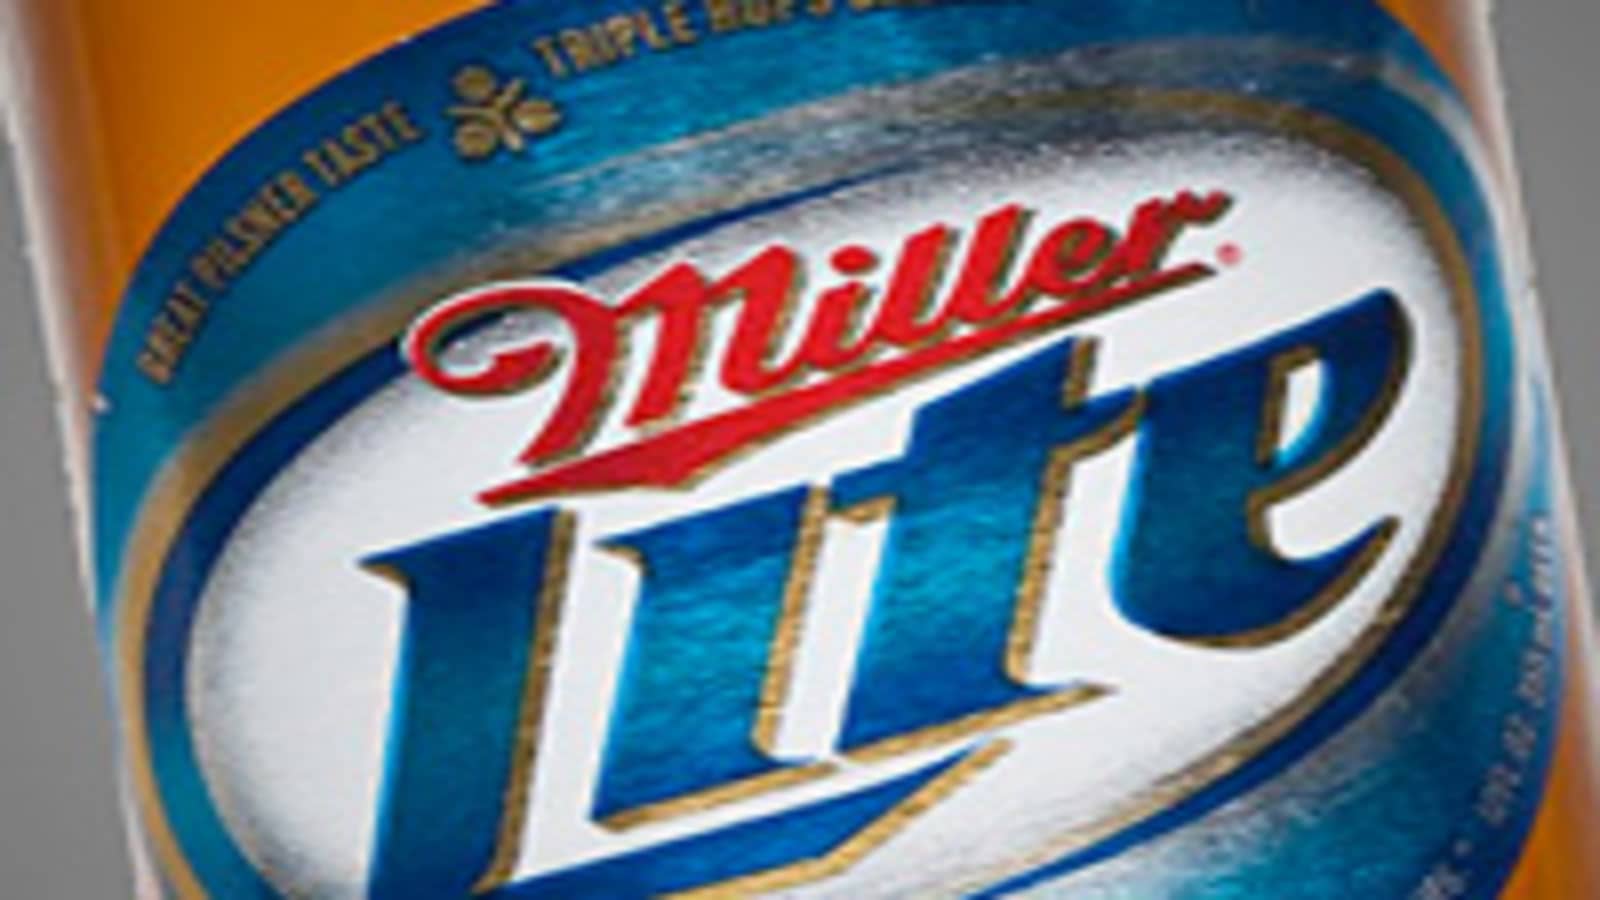 Another Round for Miller Time